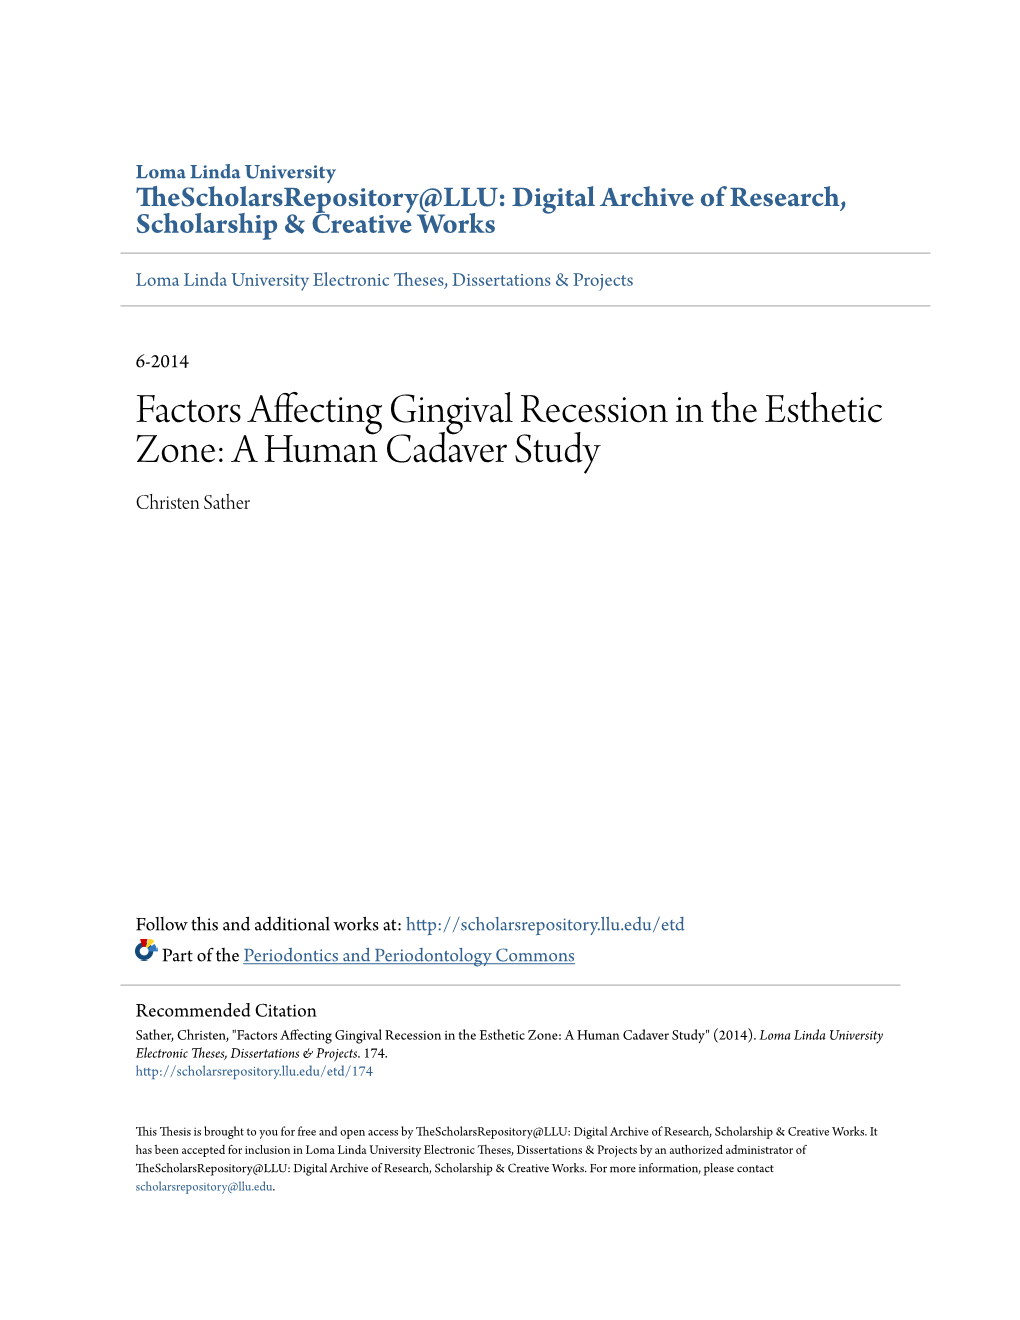 Factors Affecting Gingival Recession in the Esthetic Zone: a Human Cadaver Study Christen Sather